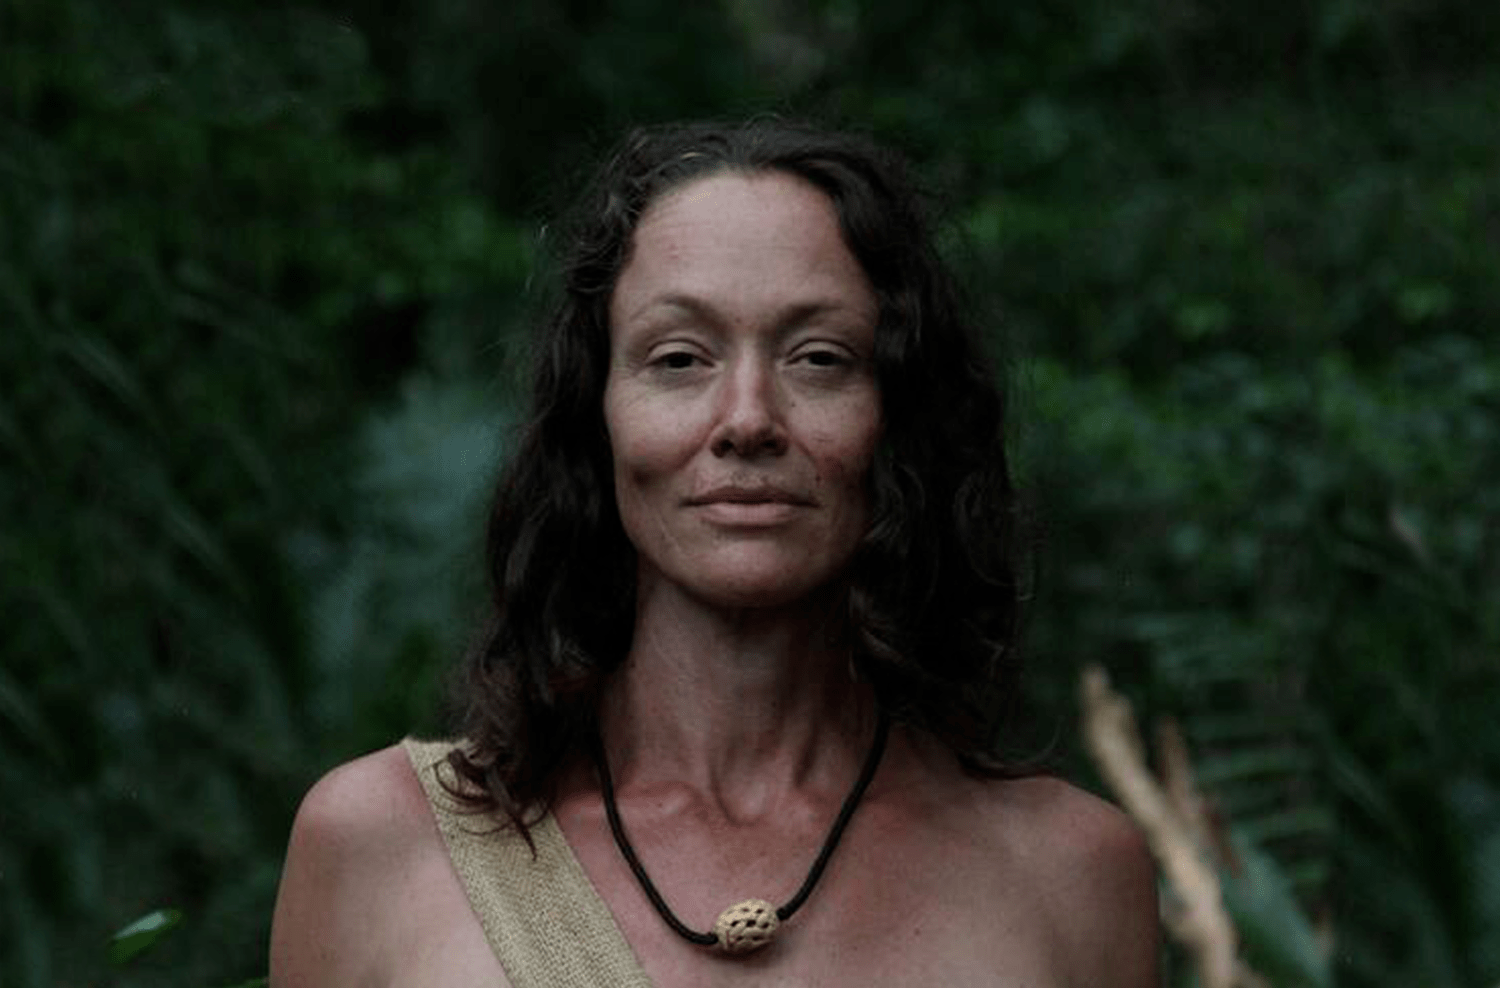 Naked And Afraid Death Has Anyone Ever Died on the Show?